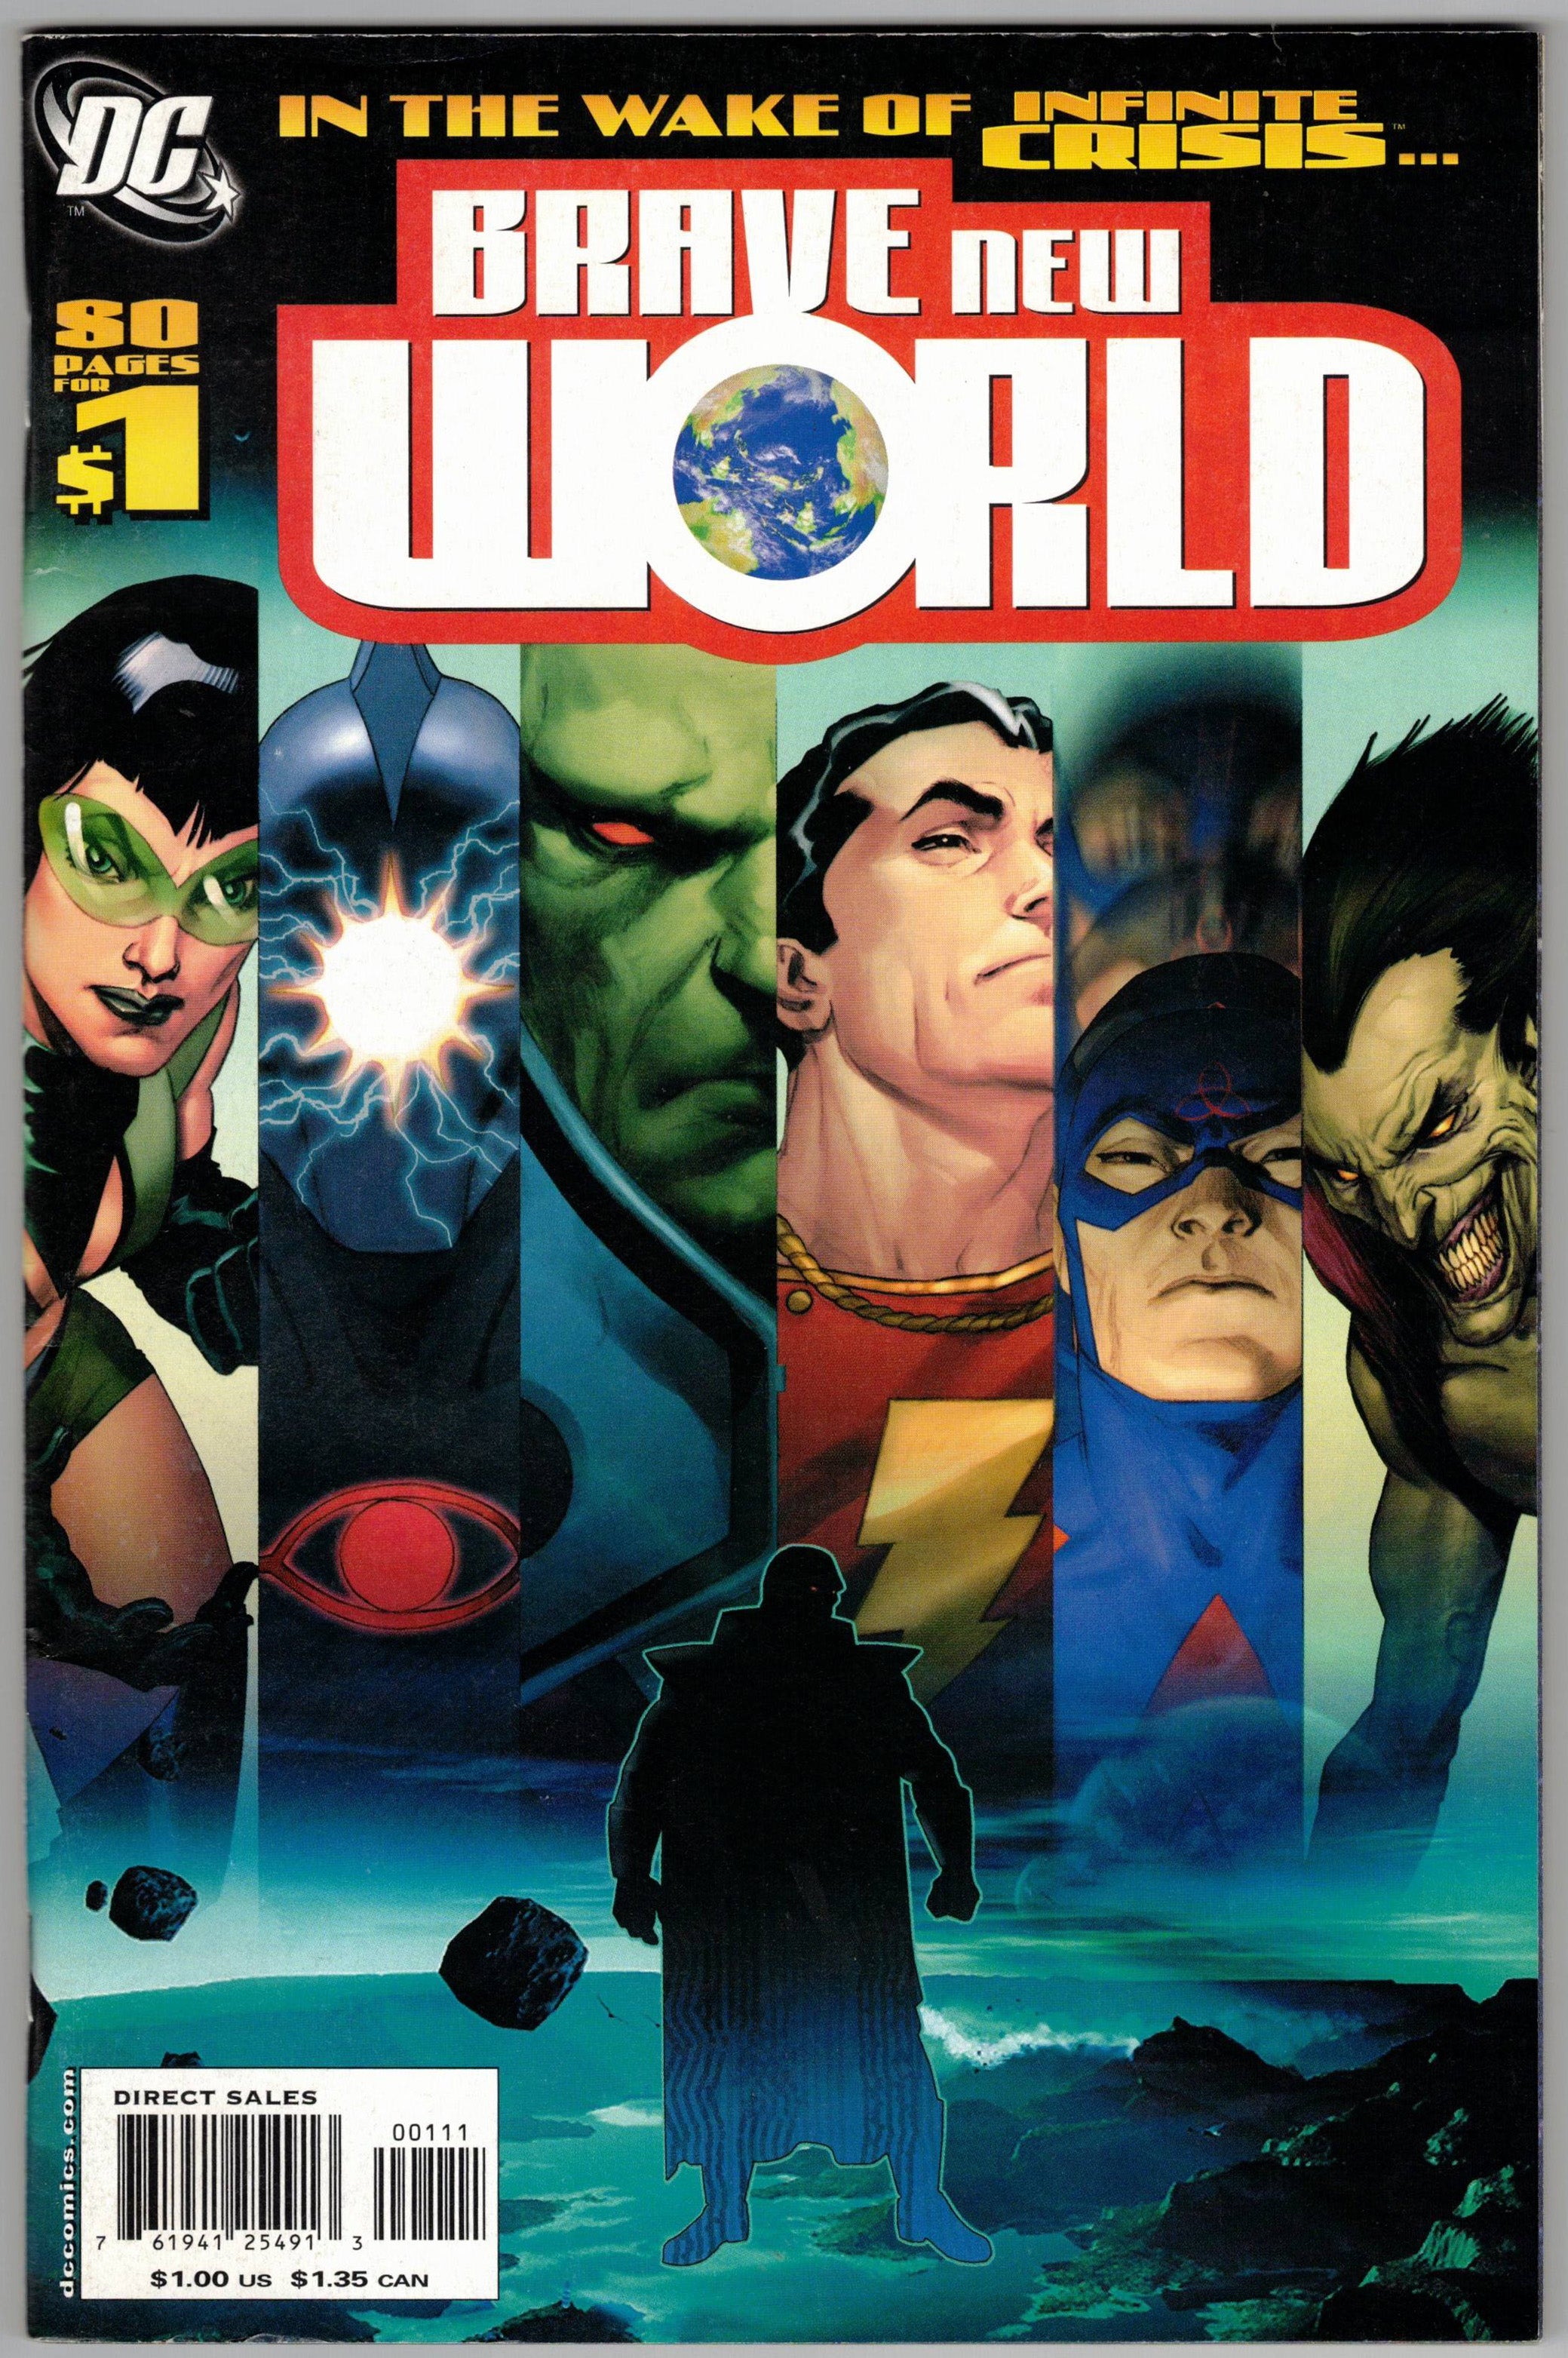 Photo of DCU: Brave New World (2006) Issue 1 - Comic sold by Stronghold Collectibles